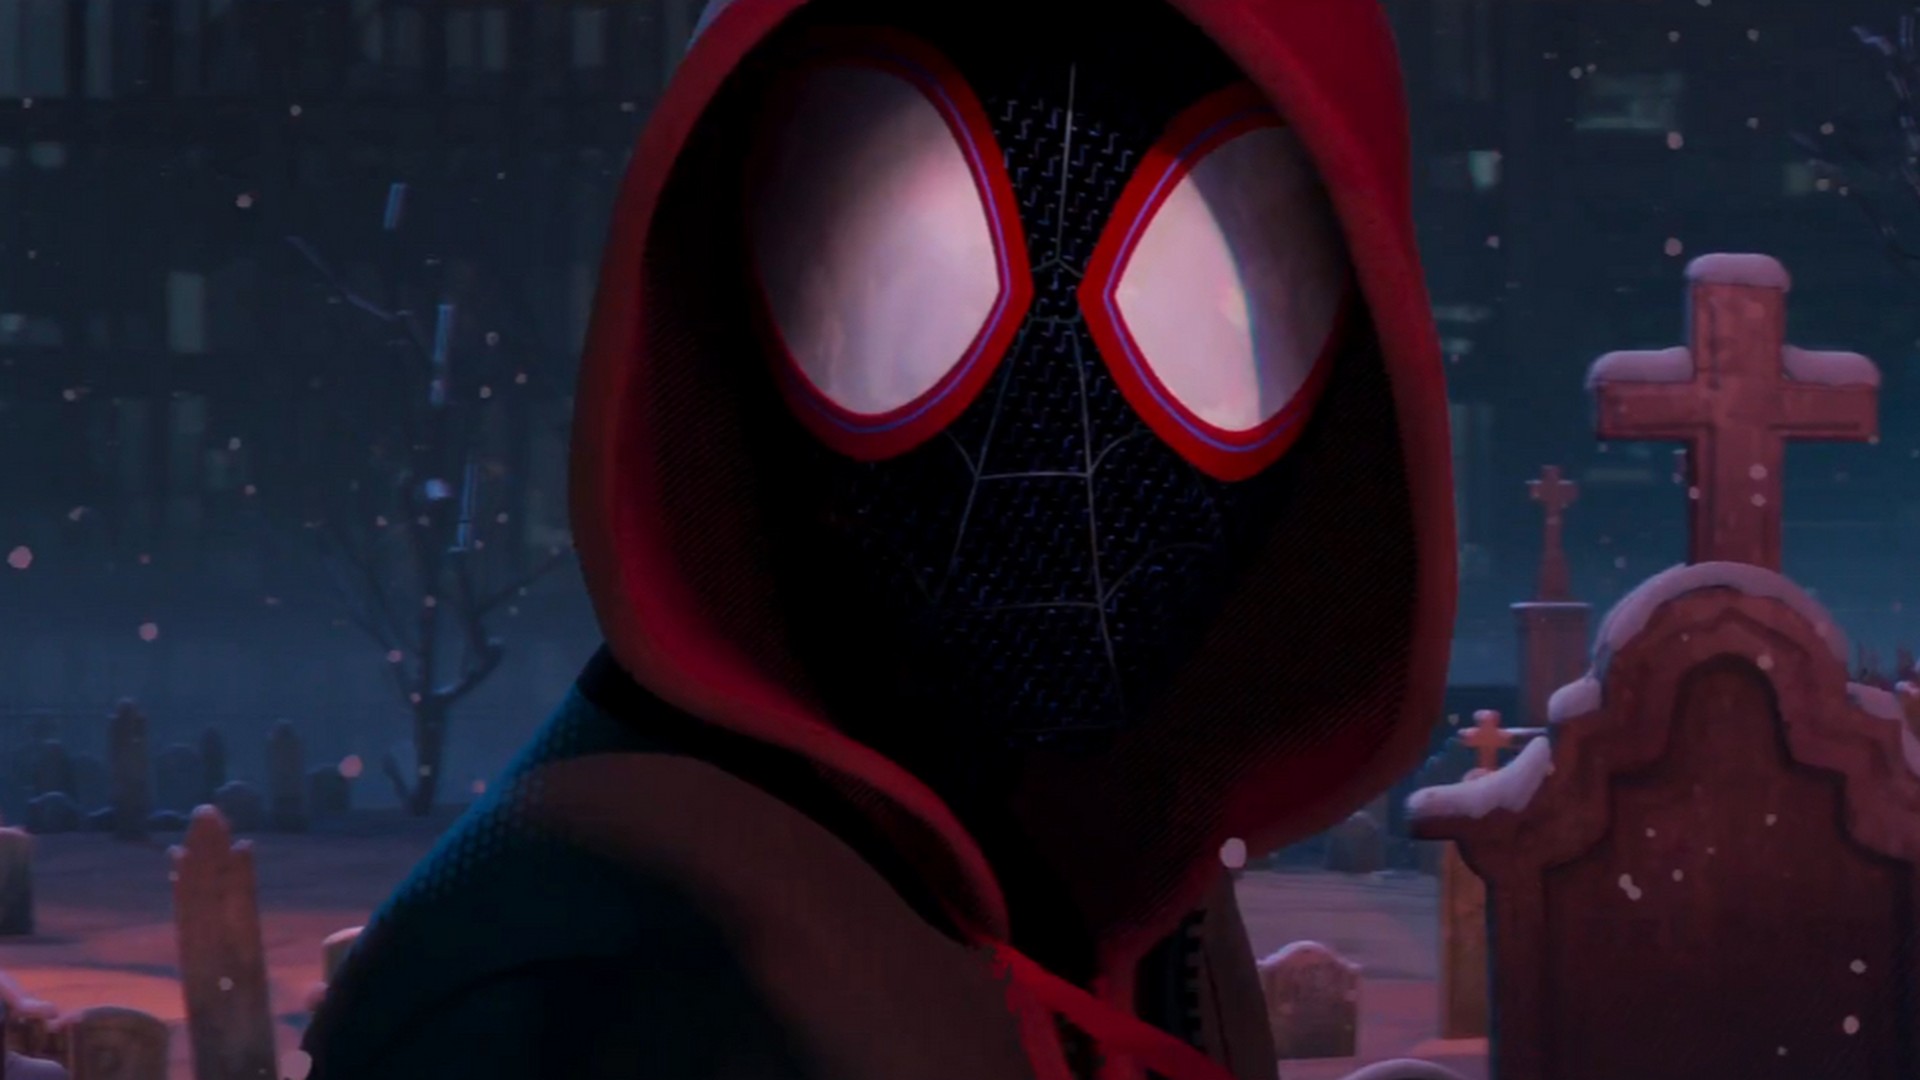 Spider-Man Into the Spider-Verse 2018 Full Movie Wallpaper With Resolution 1920X1080 pixel. You can make this wallpaper for your Mac or Windows Desktop Background, iPhone, Android or Tablet and another Smartphone device for free